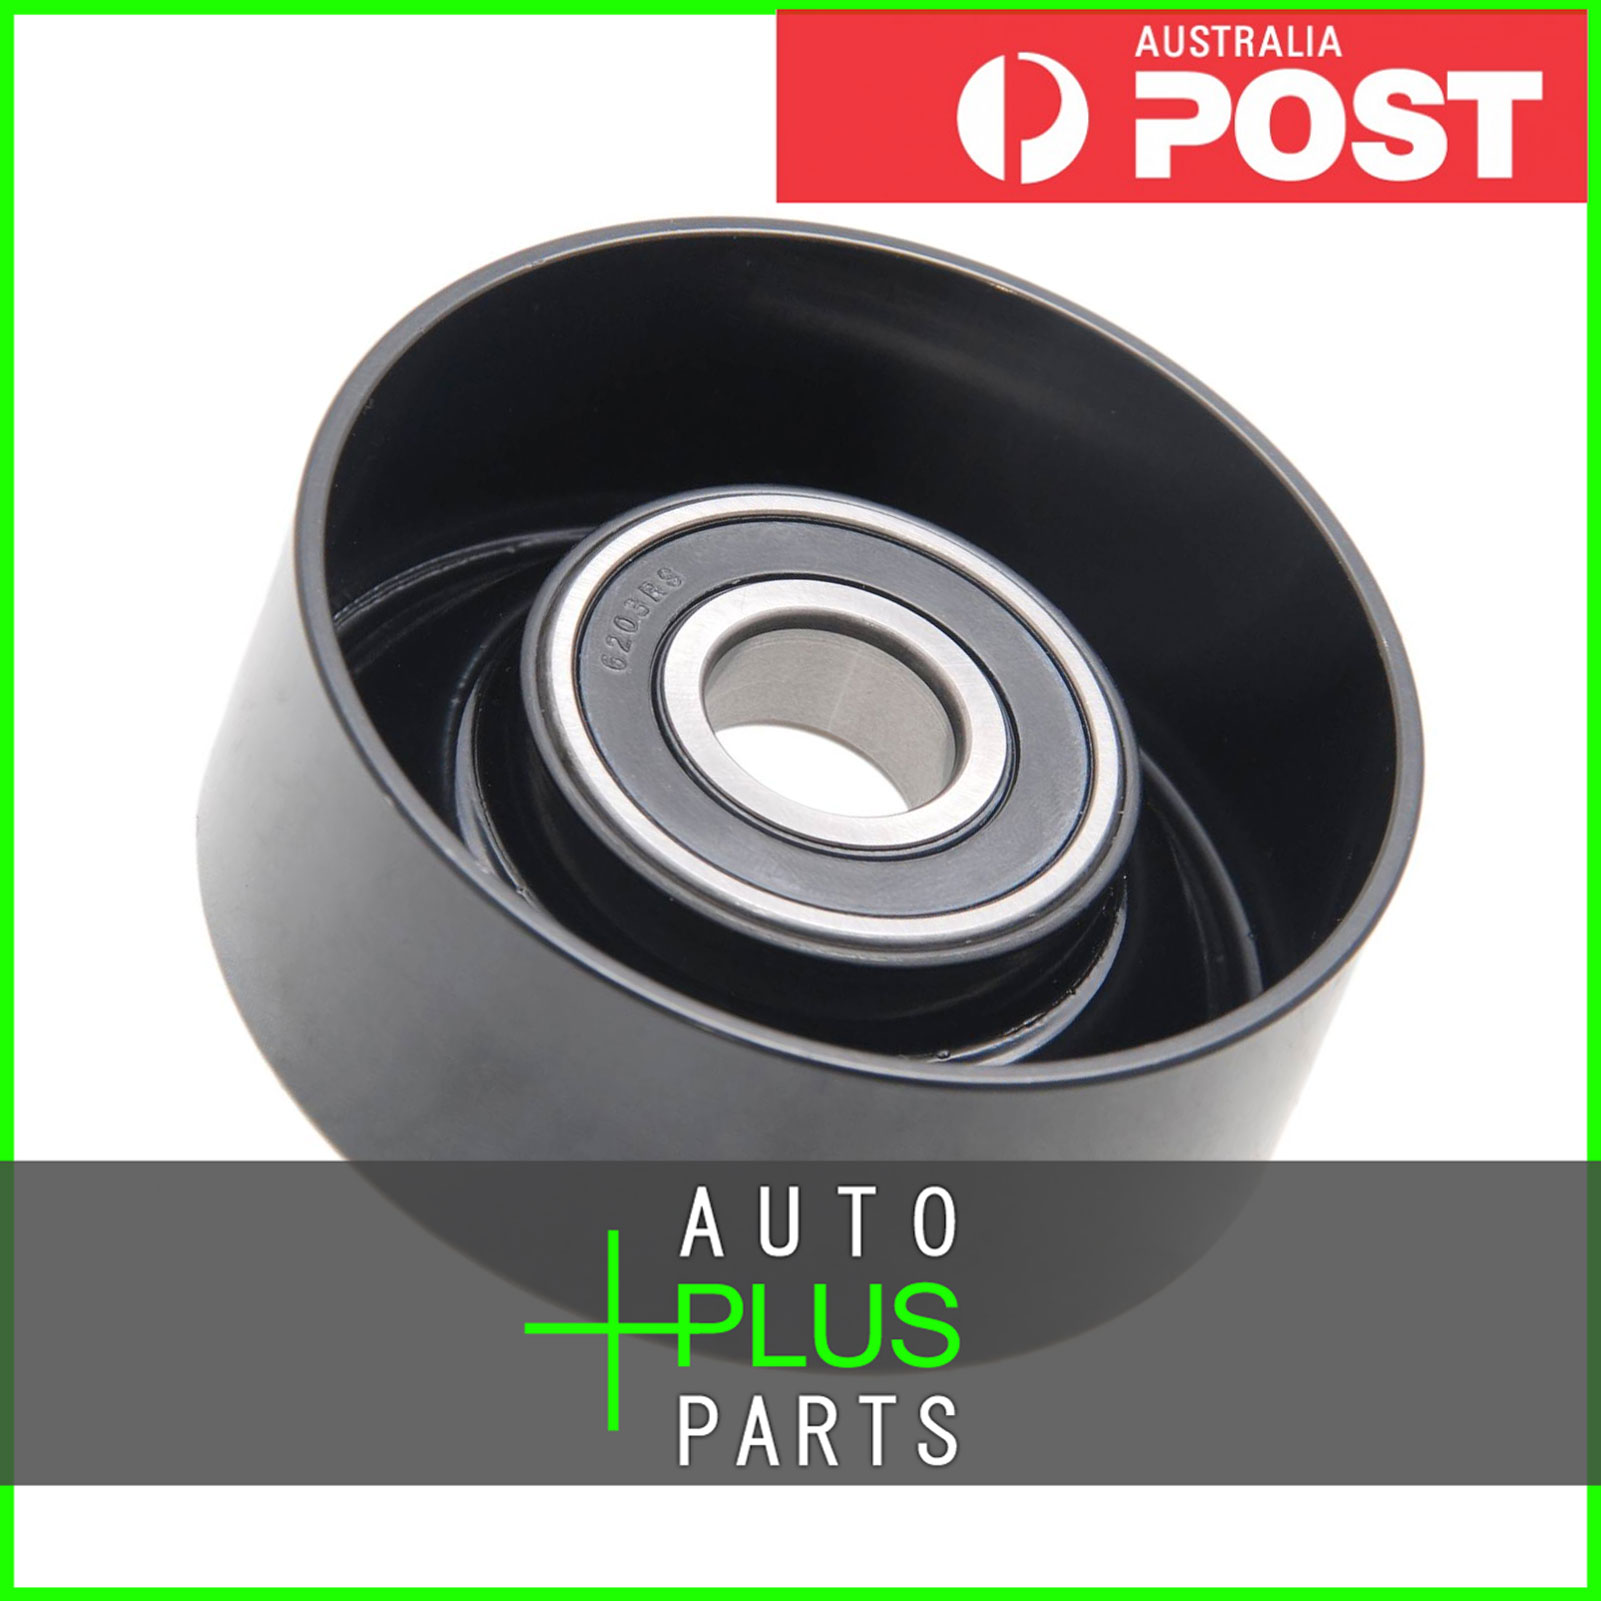 Fits PONTIAC FIREBIRD IV 1992-2002 - Idler Tensioner Drive Belt Bearing Pulley Product Photo